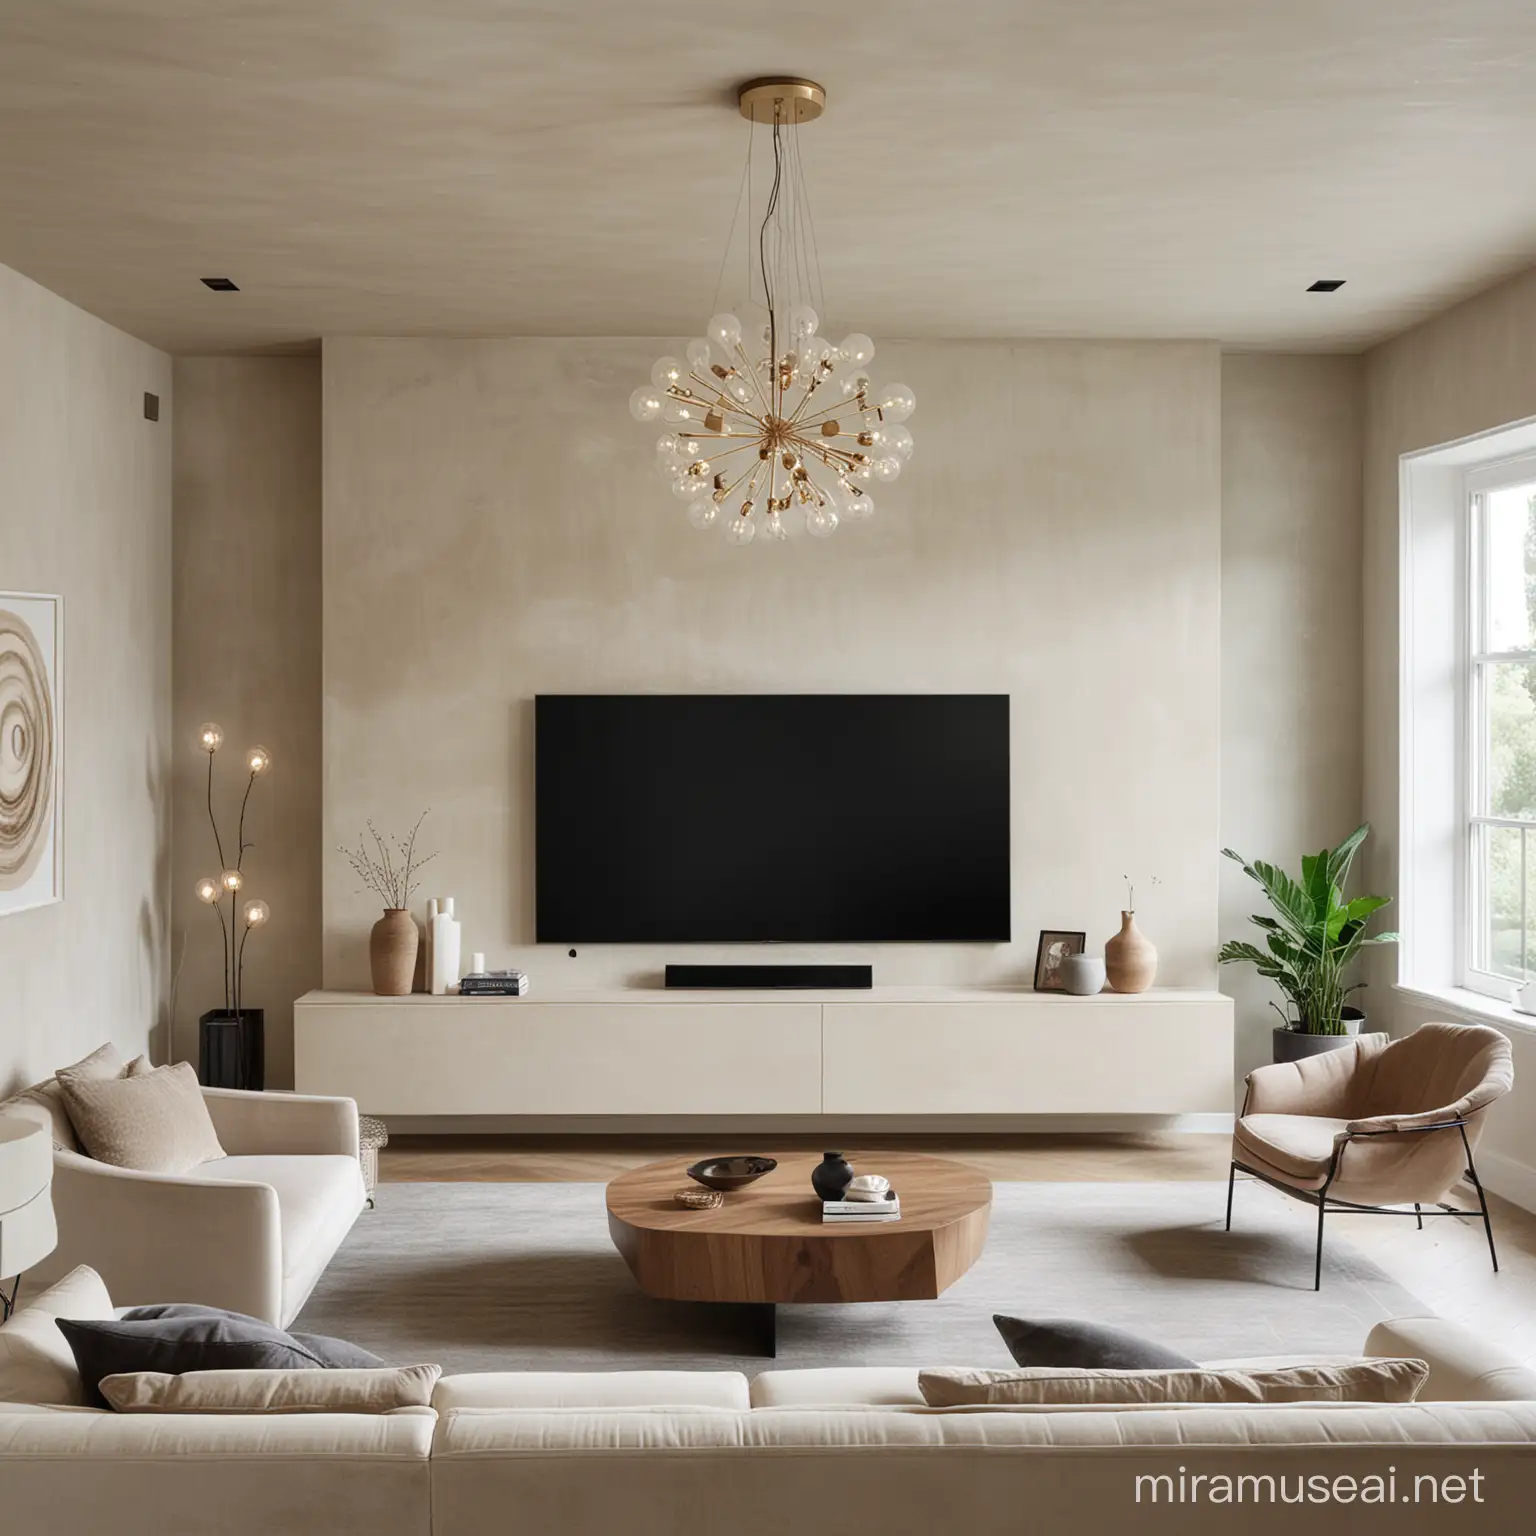 Luxurious Minimalist tv room Room with Limewash Walls with statement light fixture